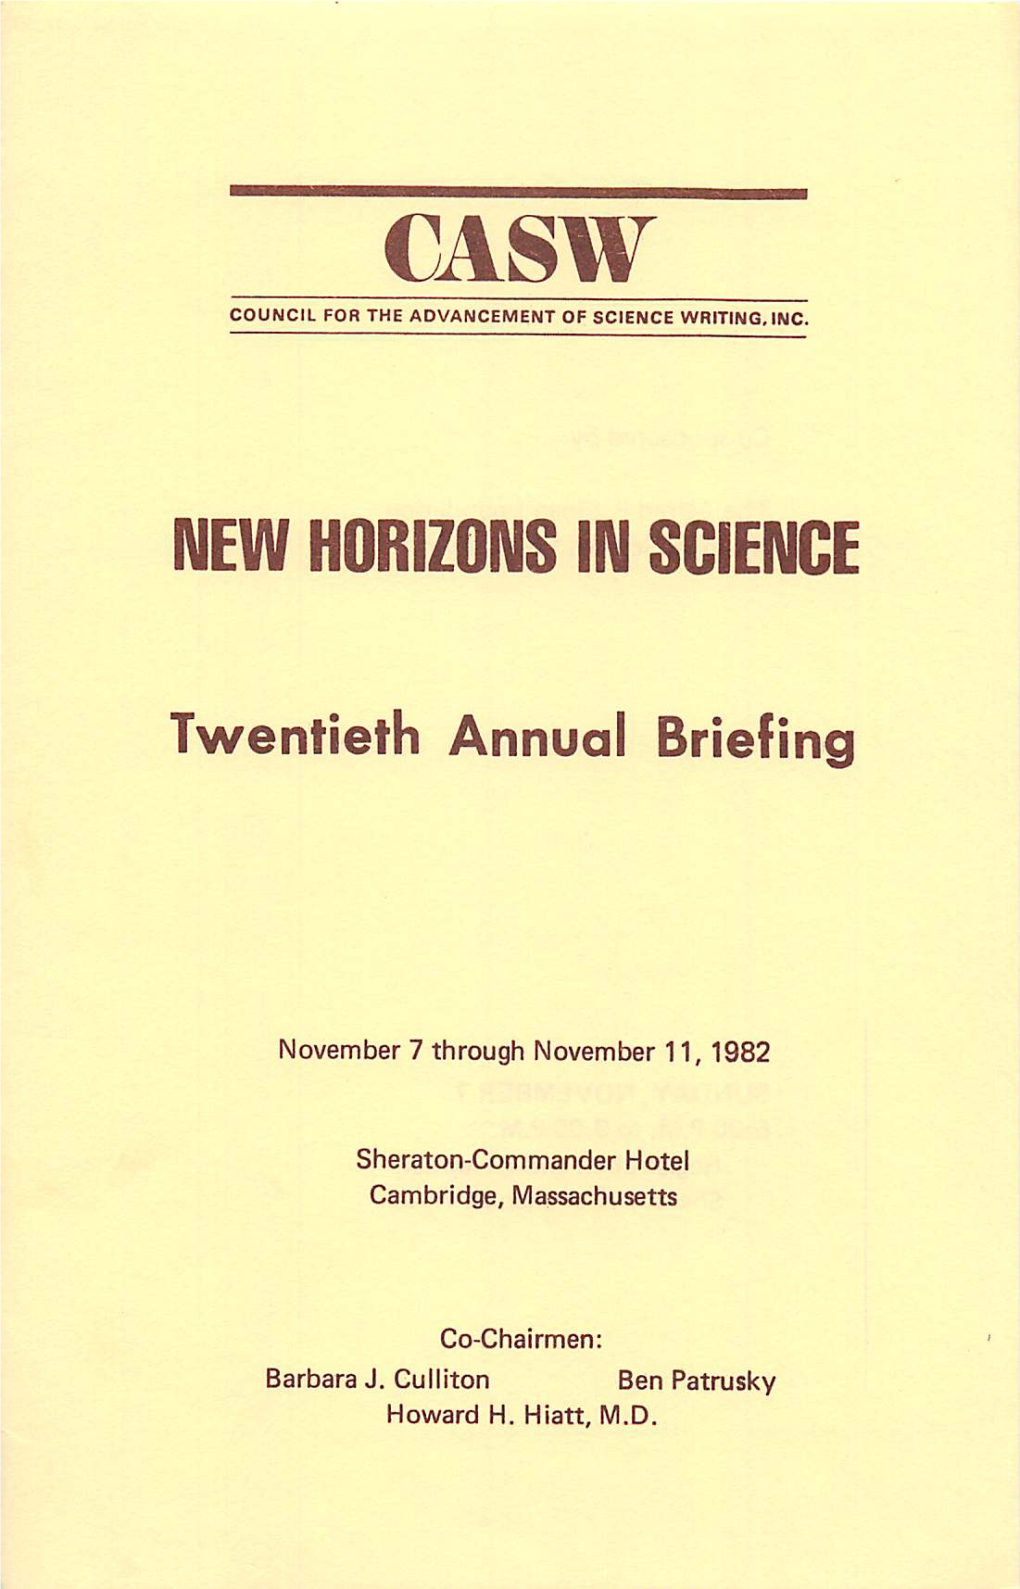 New Horizons in Science